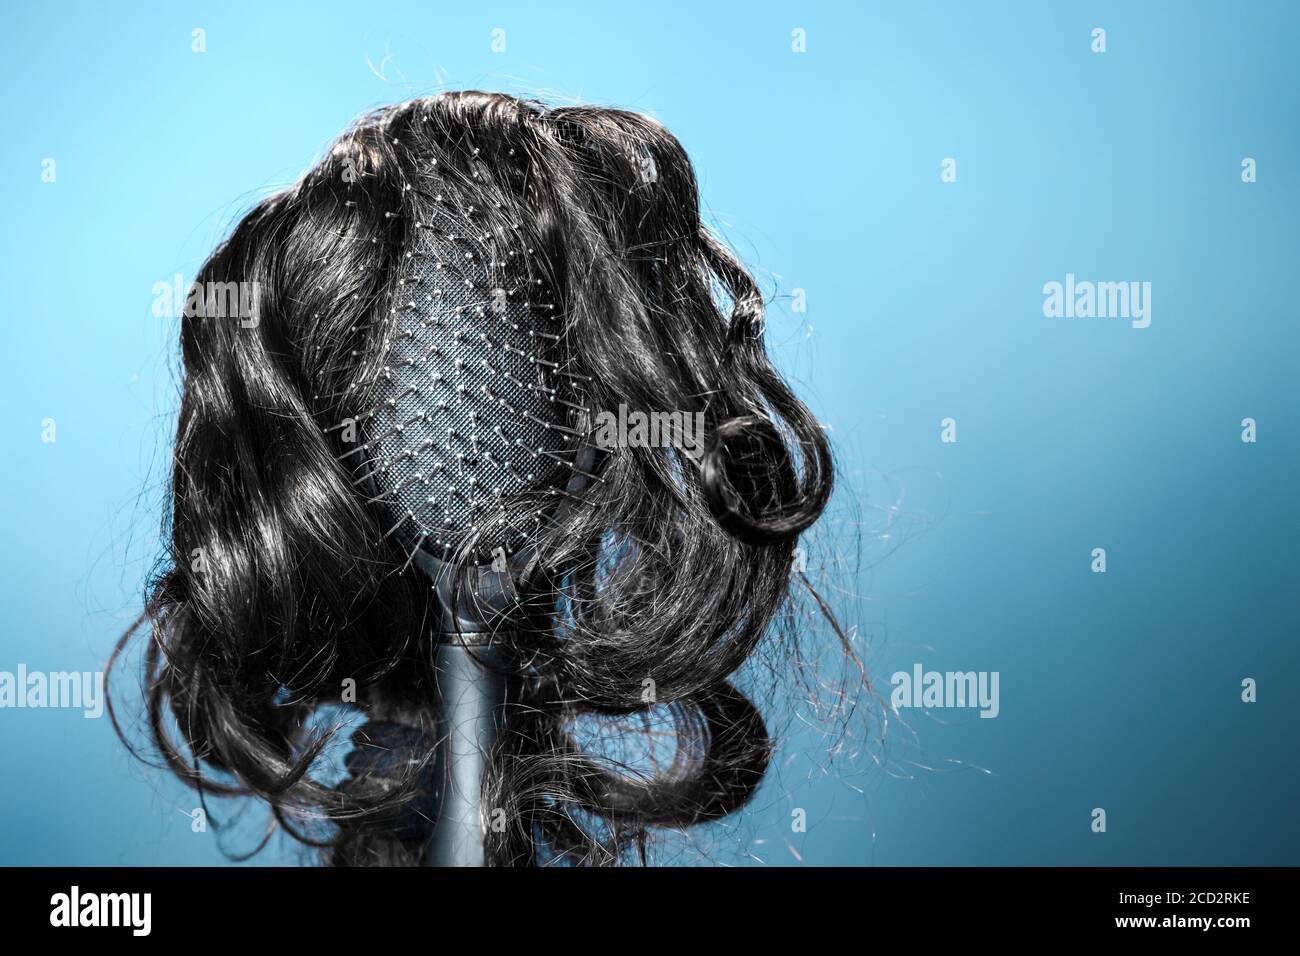 Females hair. Black hairbrush with a black wig, looks like a woman's head with a hairstyle. Blue background. Copy space. Concept of beauty salon, hair Stock Photo